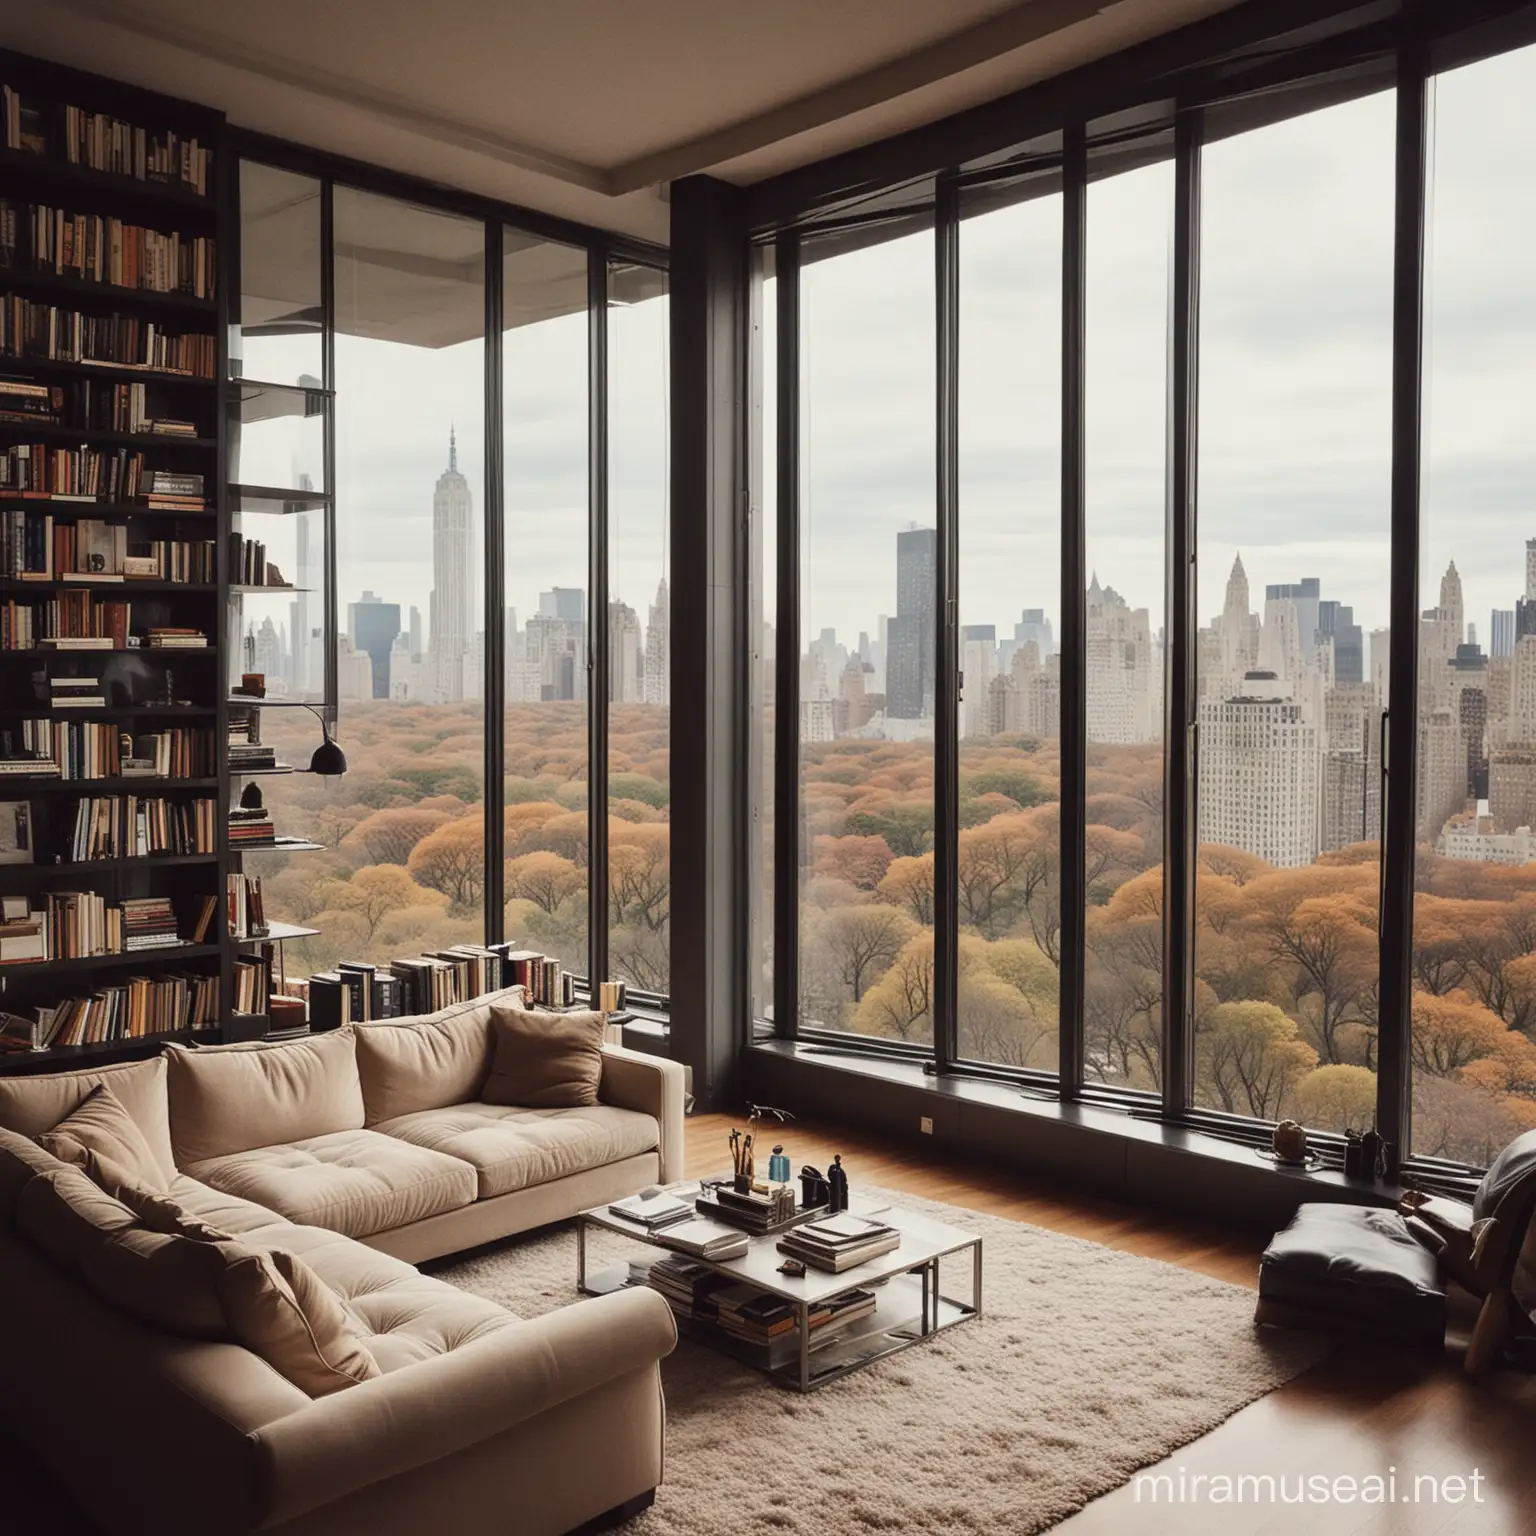 Successful Businessman in Luxurious Skyscraper Apartment Overlooking Central Park